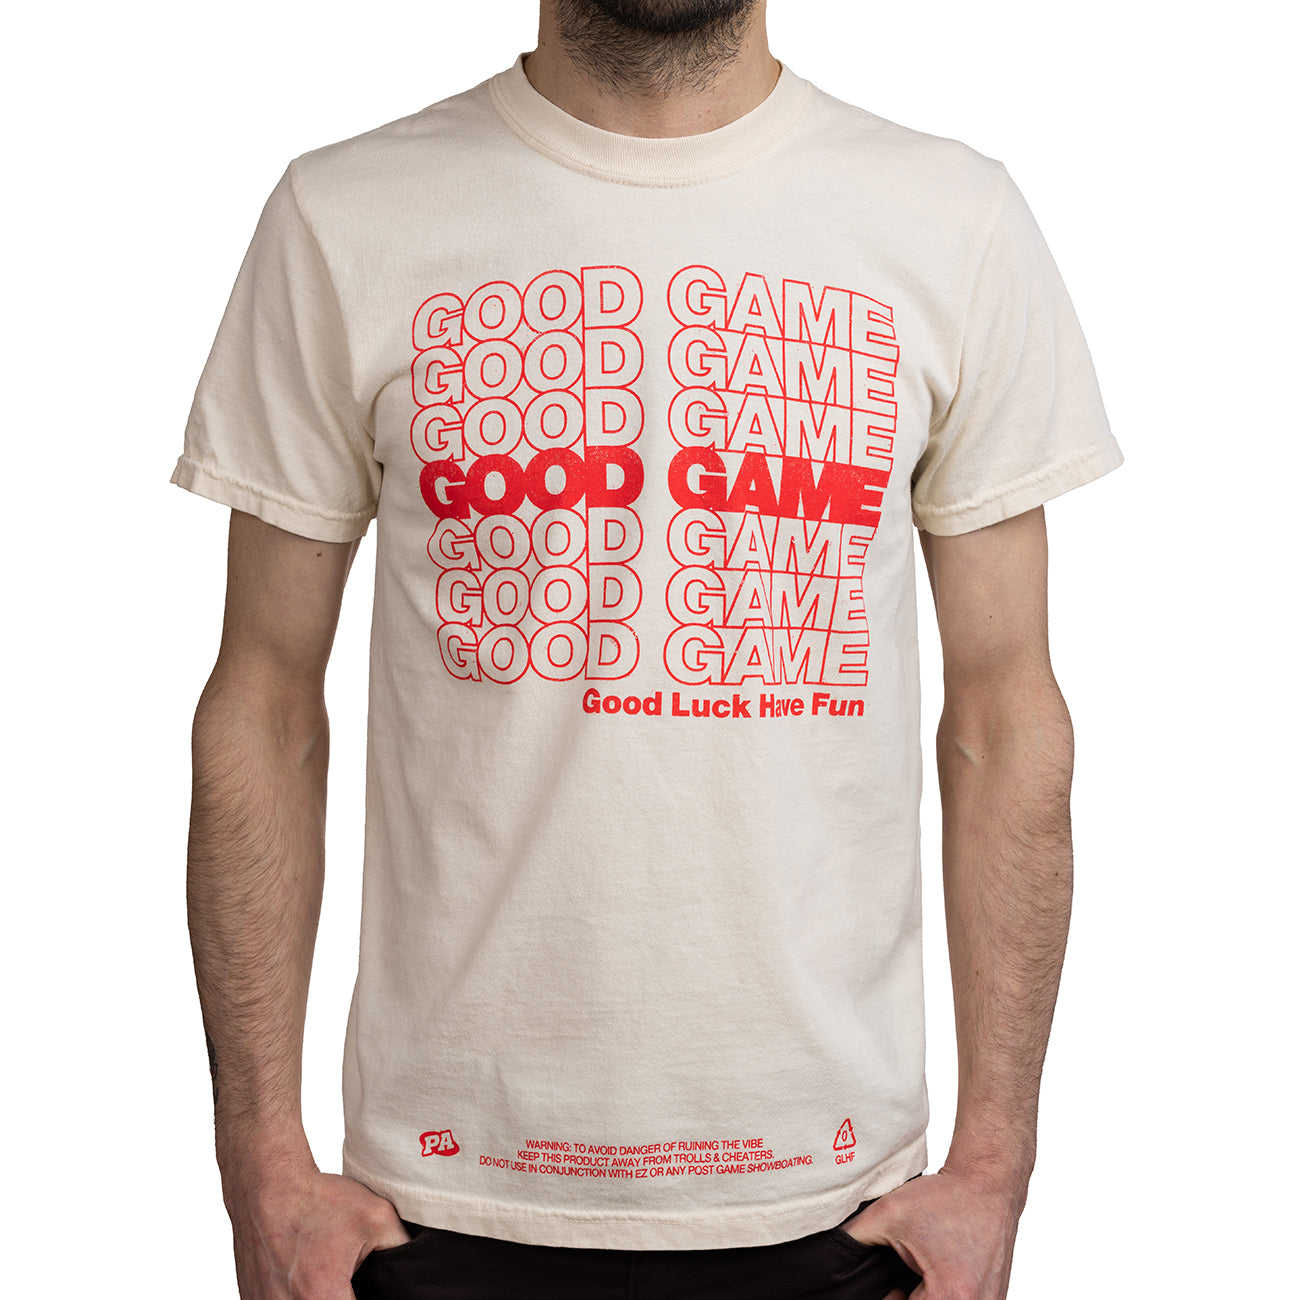 good game well played dota 2 league of legends moba gamers tshirt